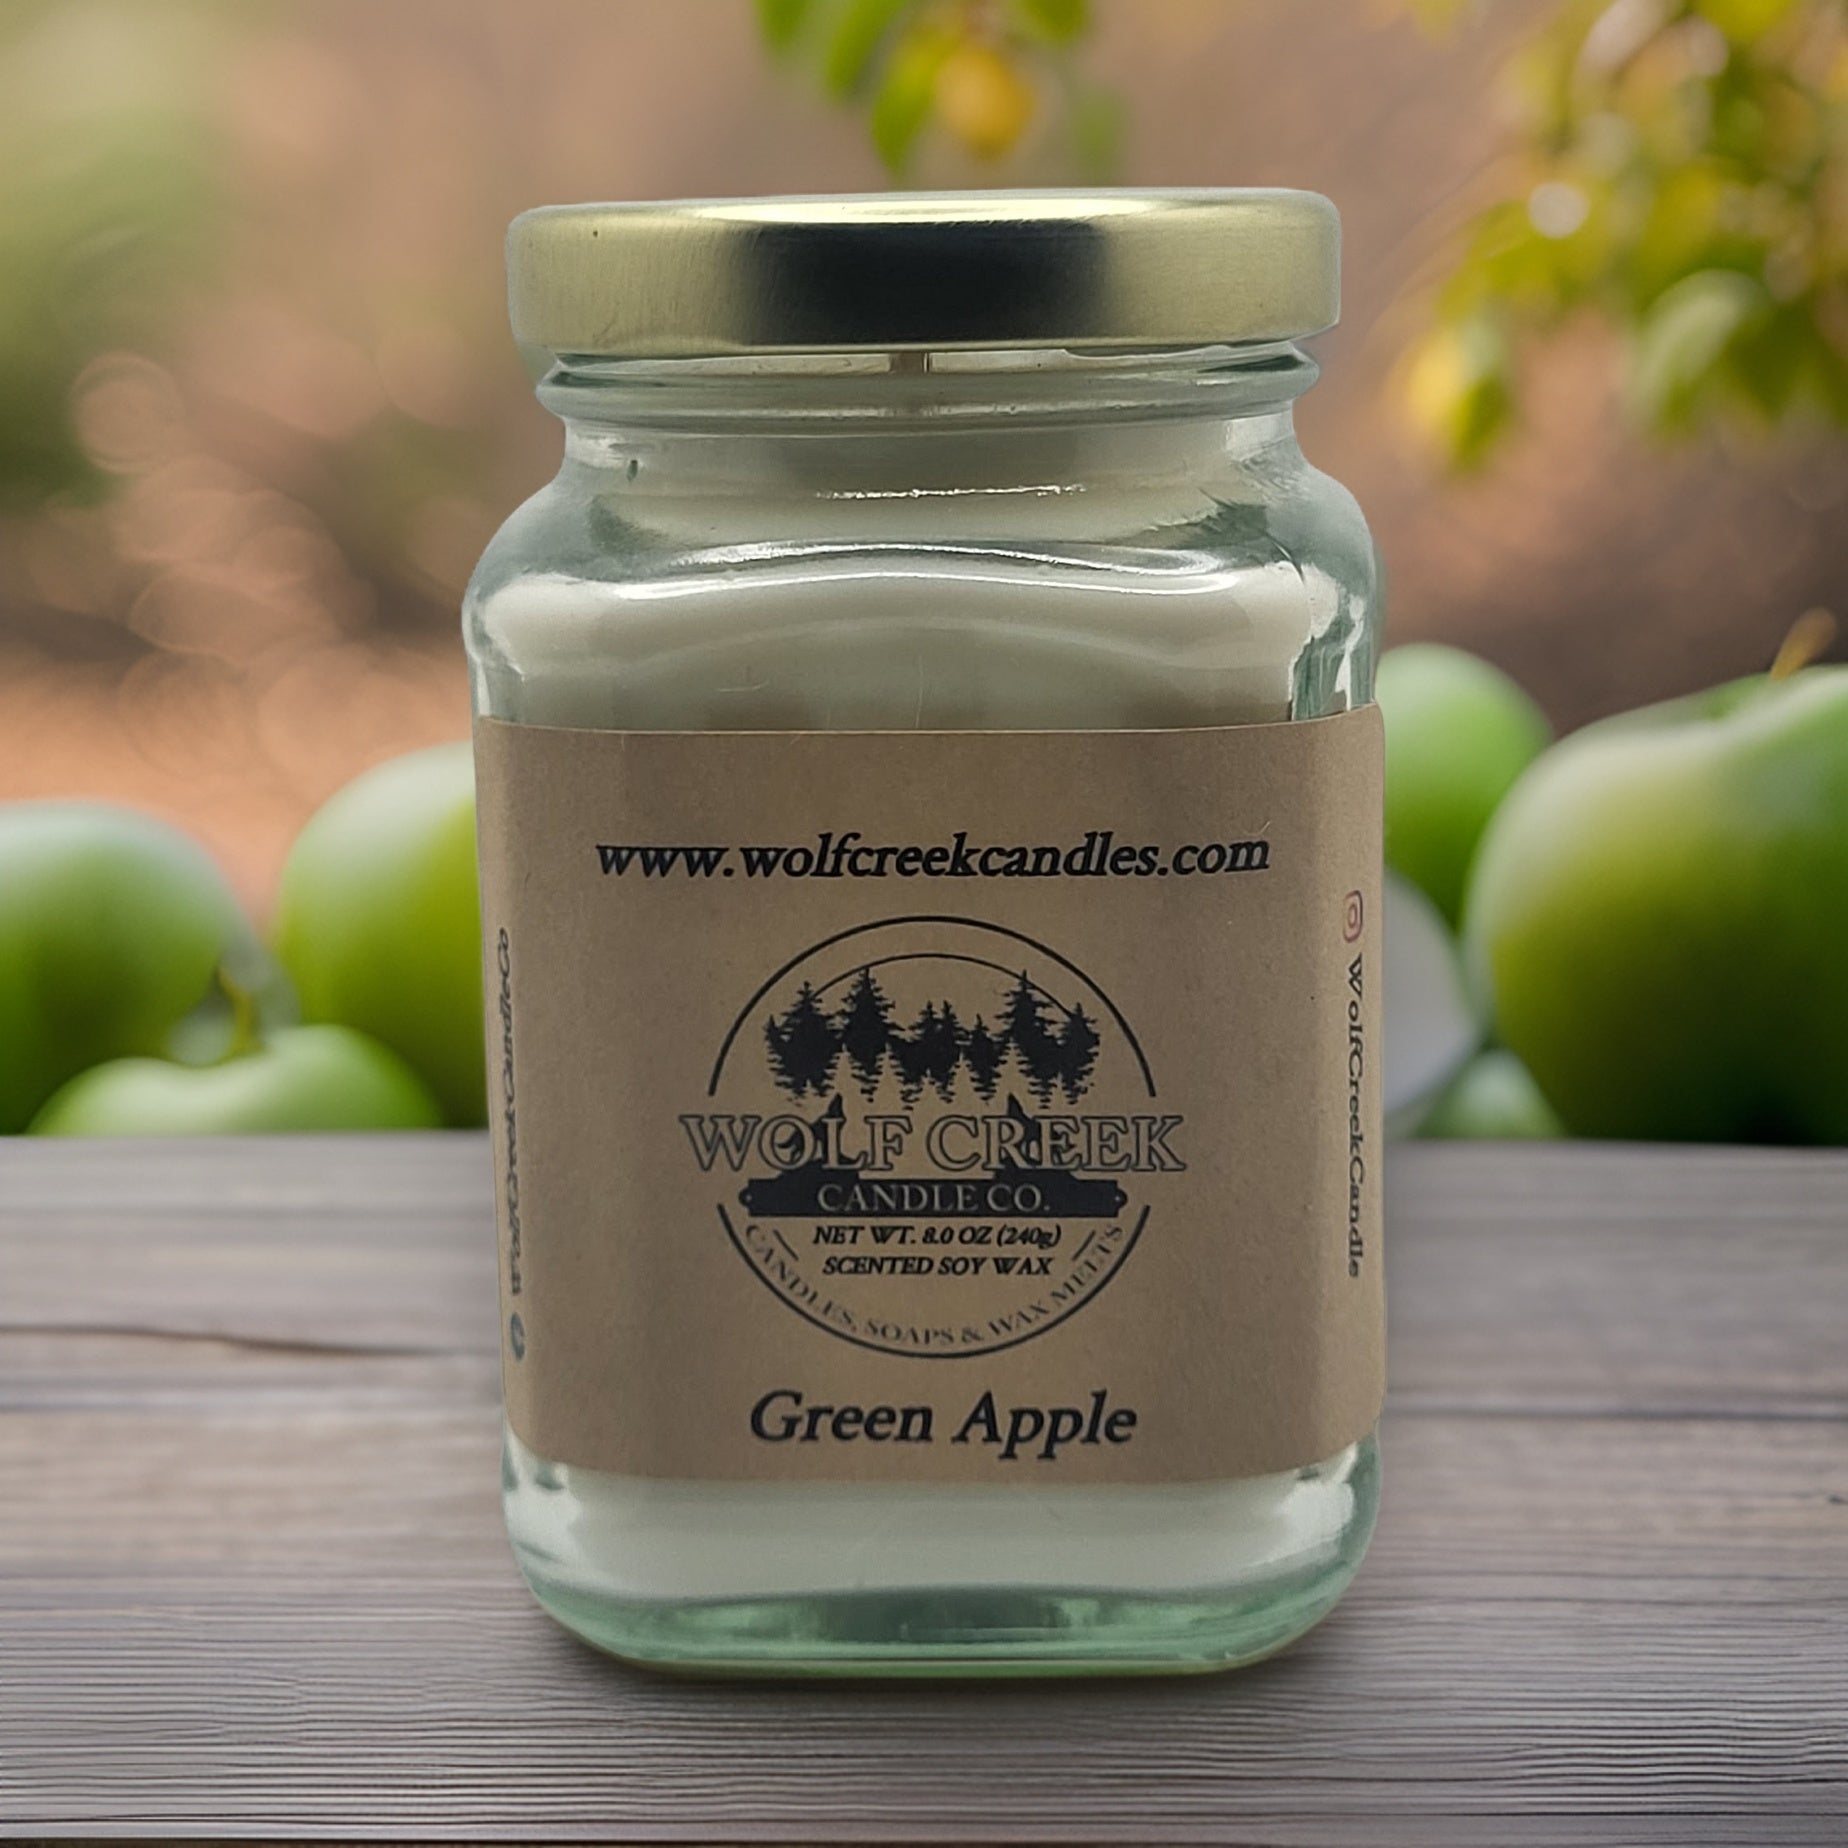 Green Apple Soy Candle - Wolf Creek Candle Co.